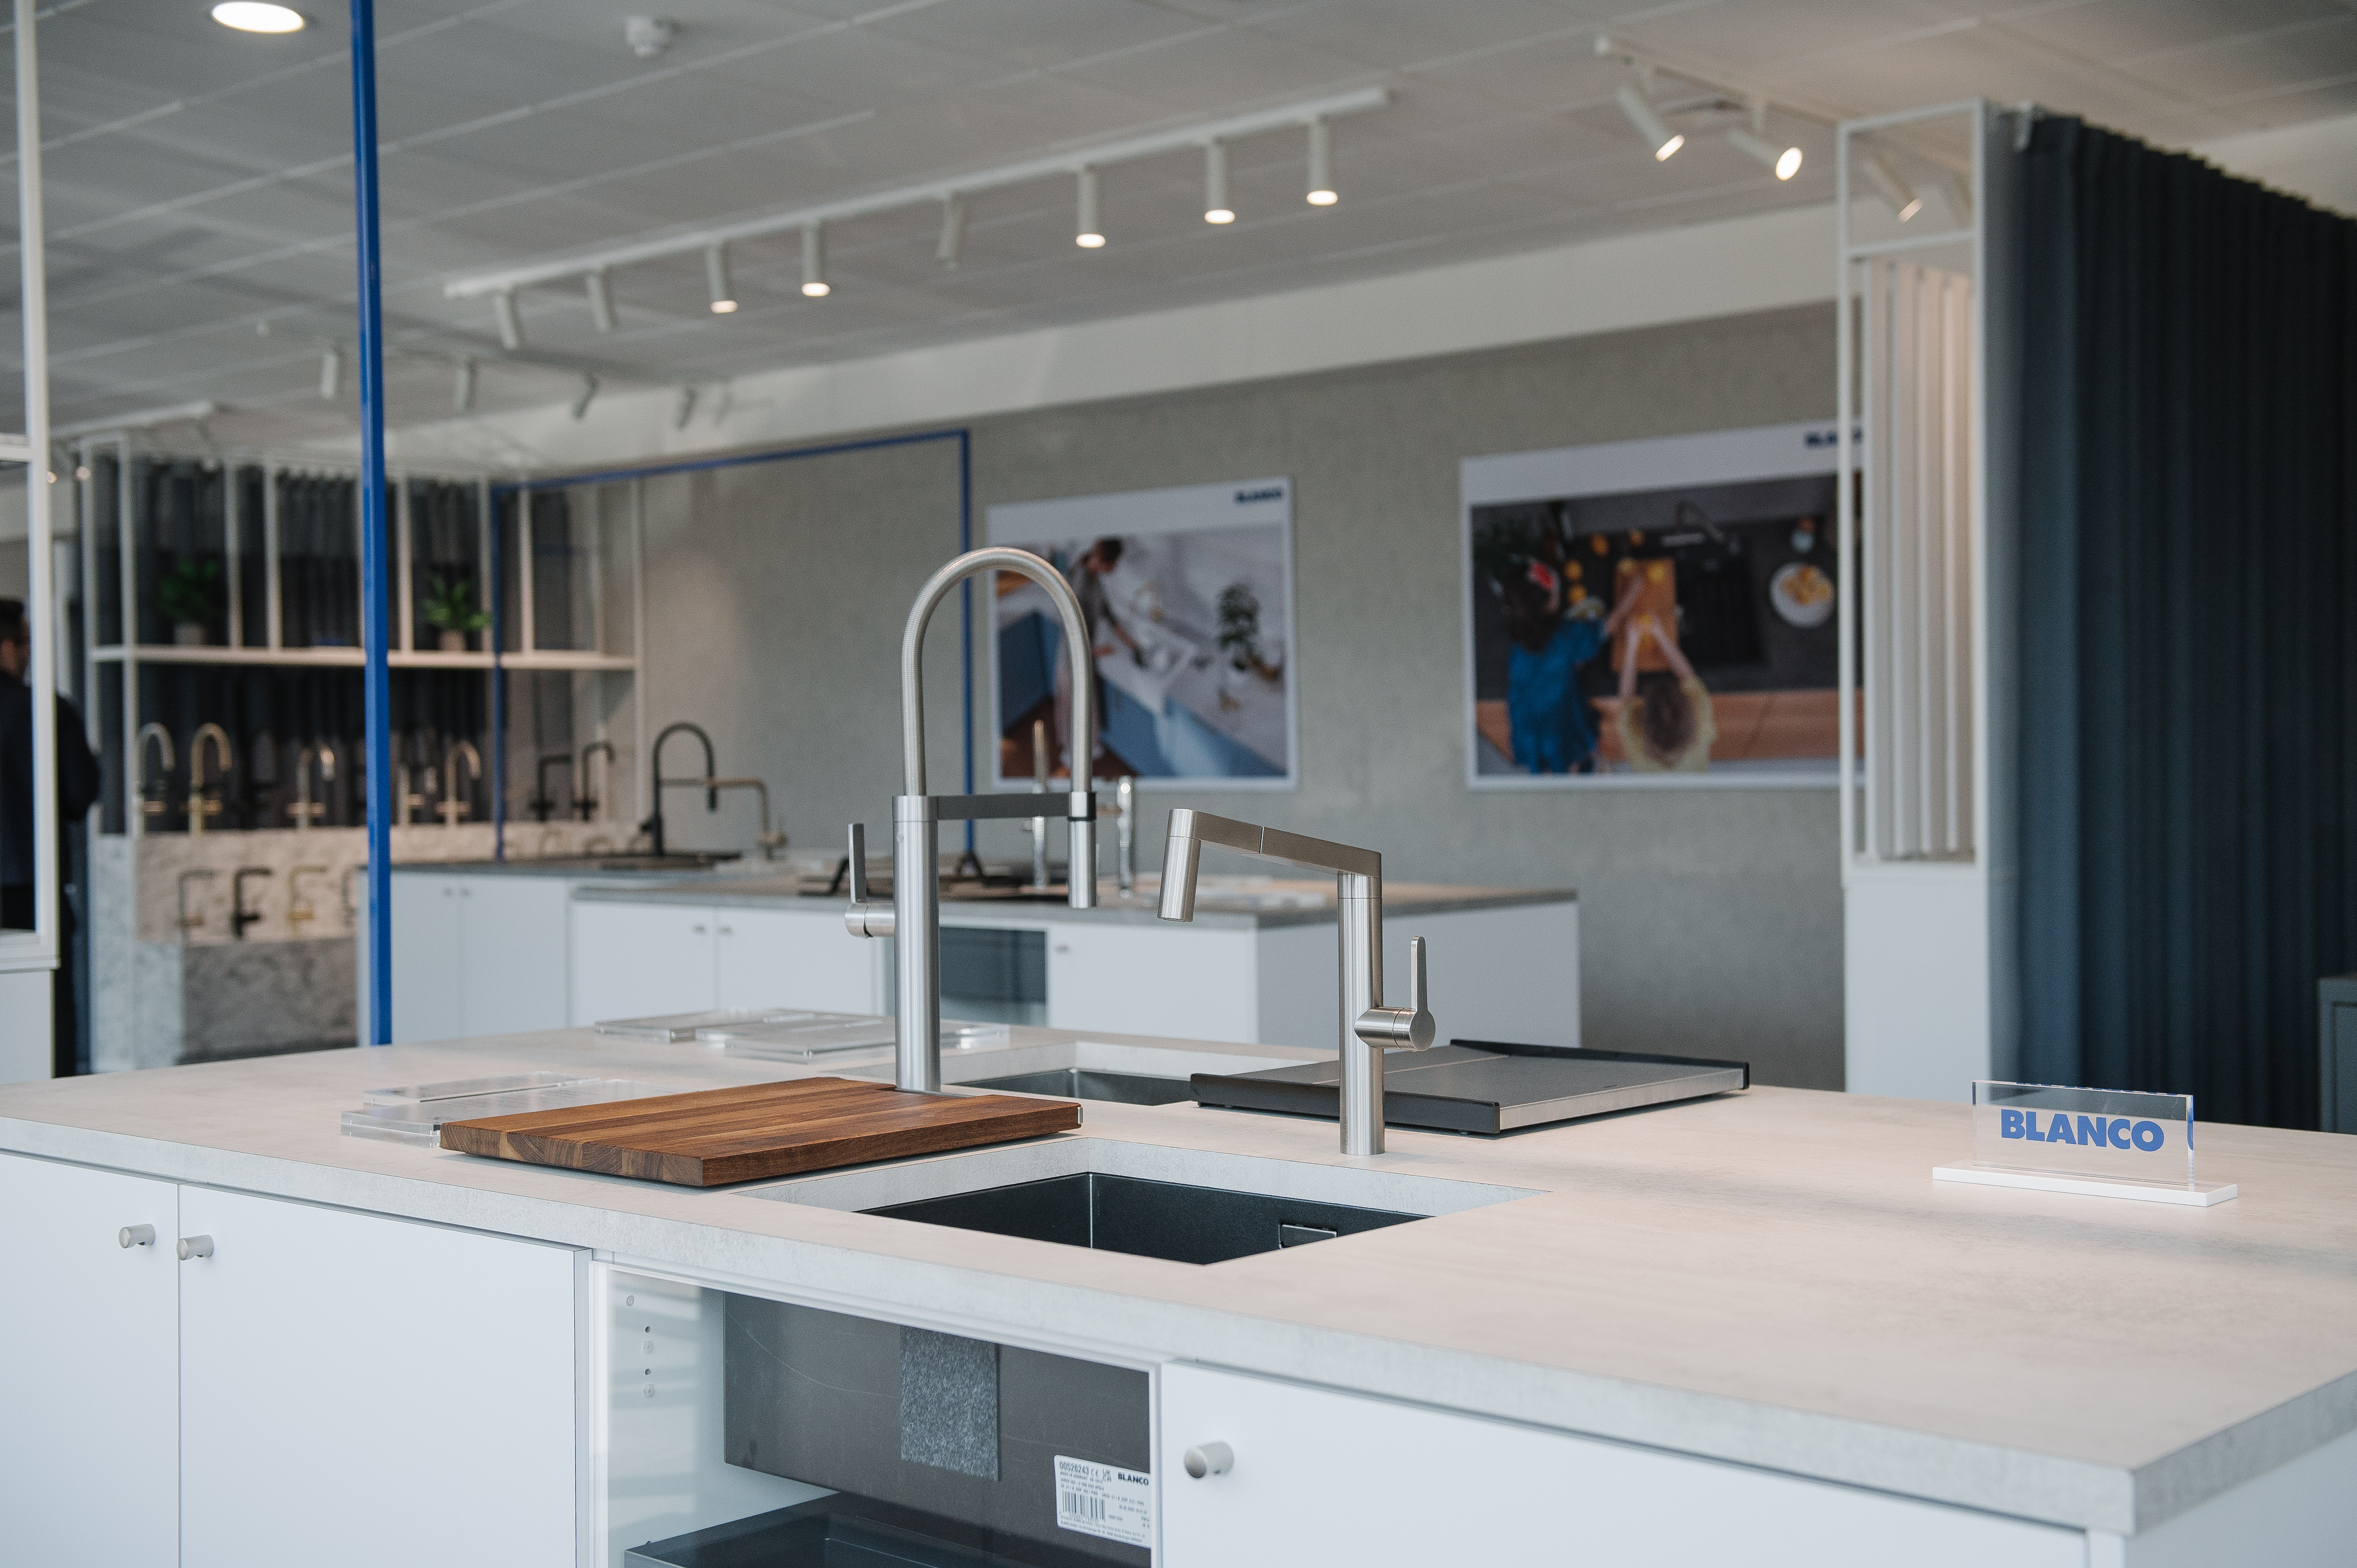 Discover the latest in kitchen design